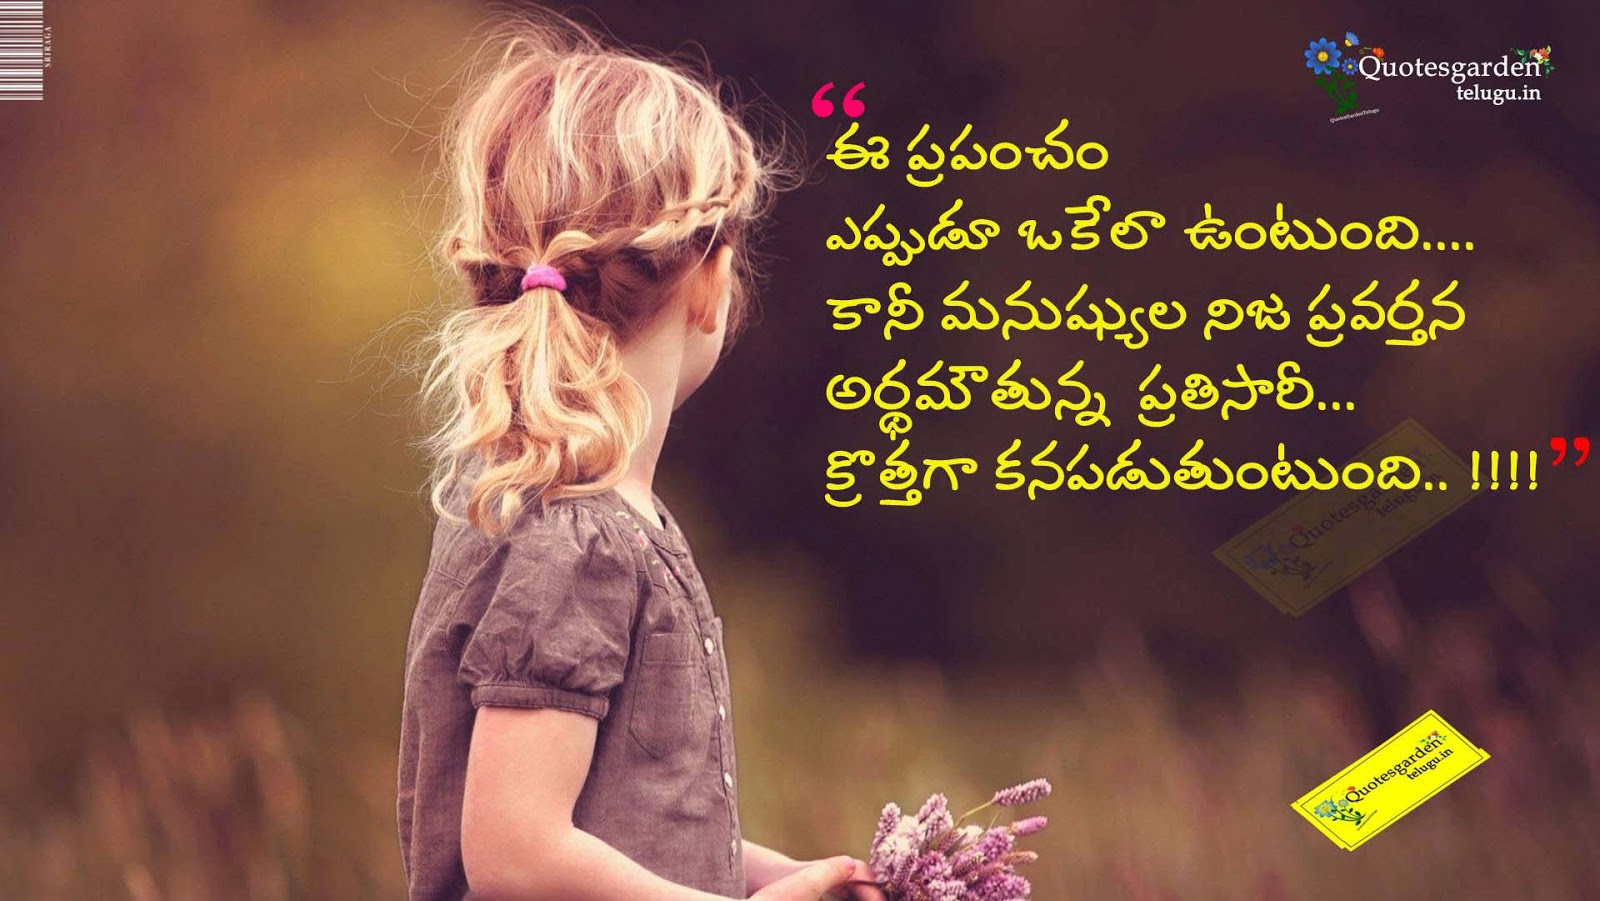 Sad Love broken heart telugu quotes with hd wallpapers 707 QUOTES